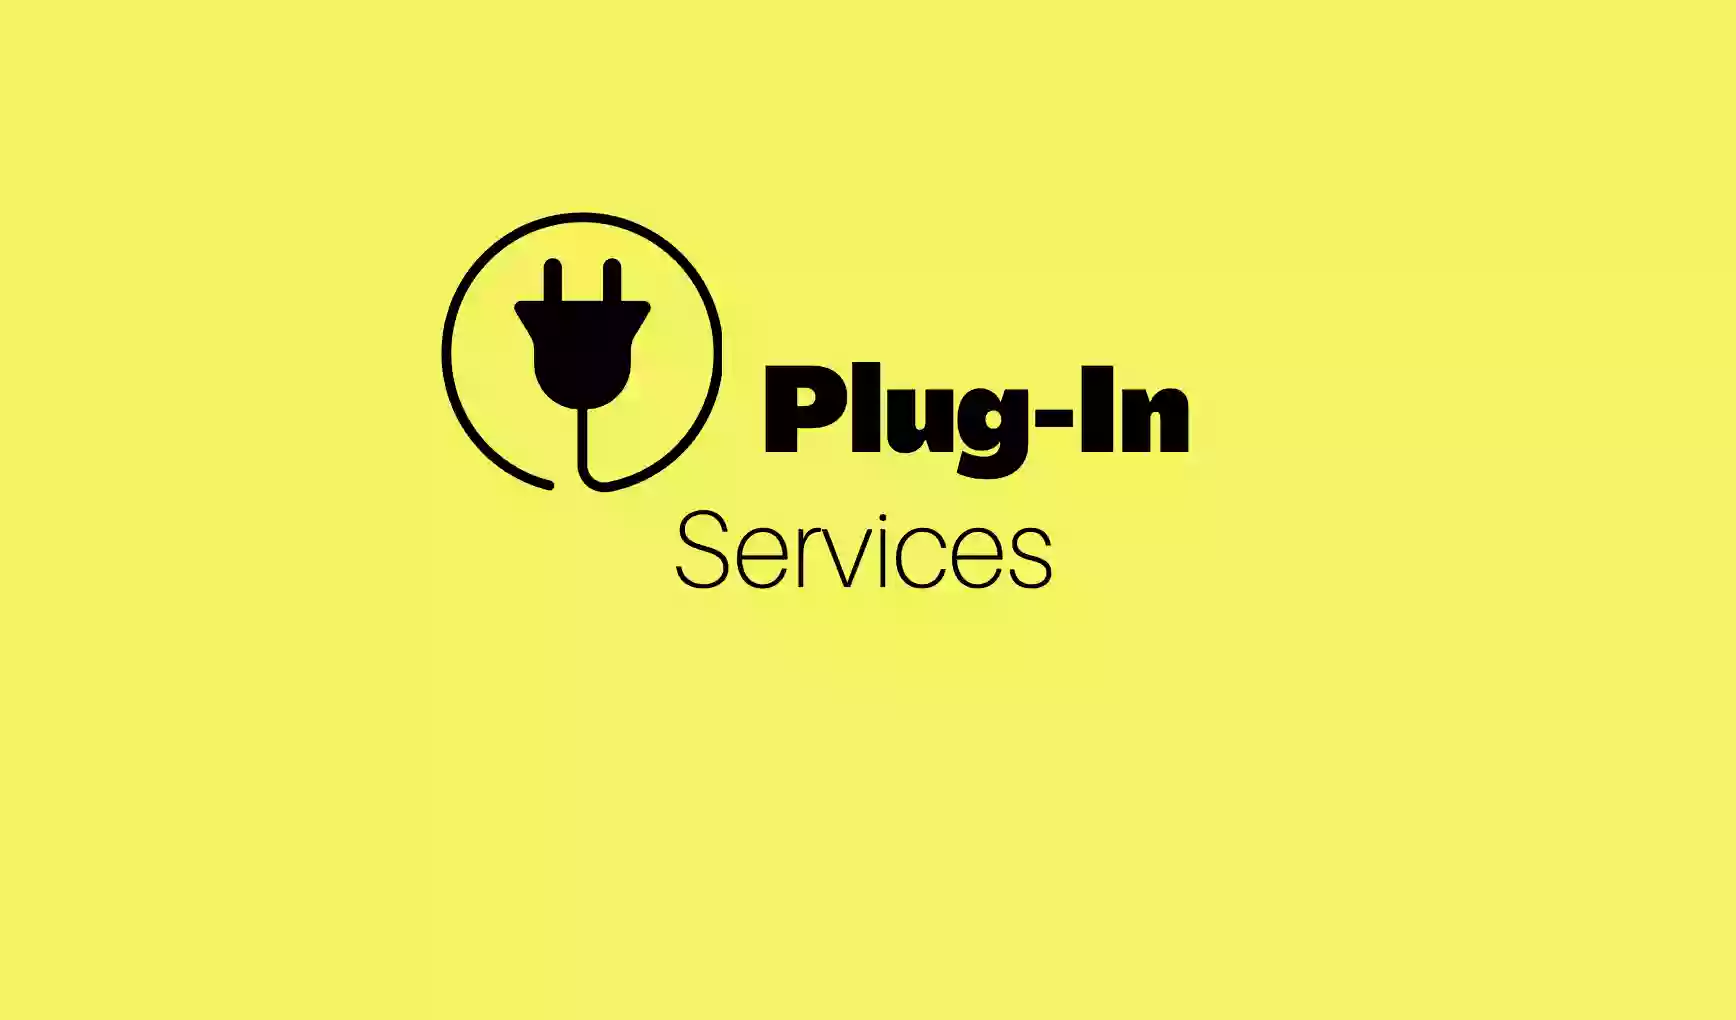 Plug-In Services